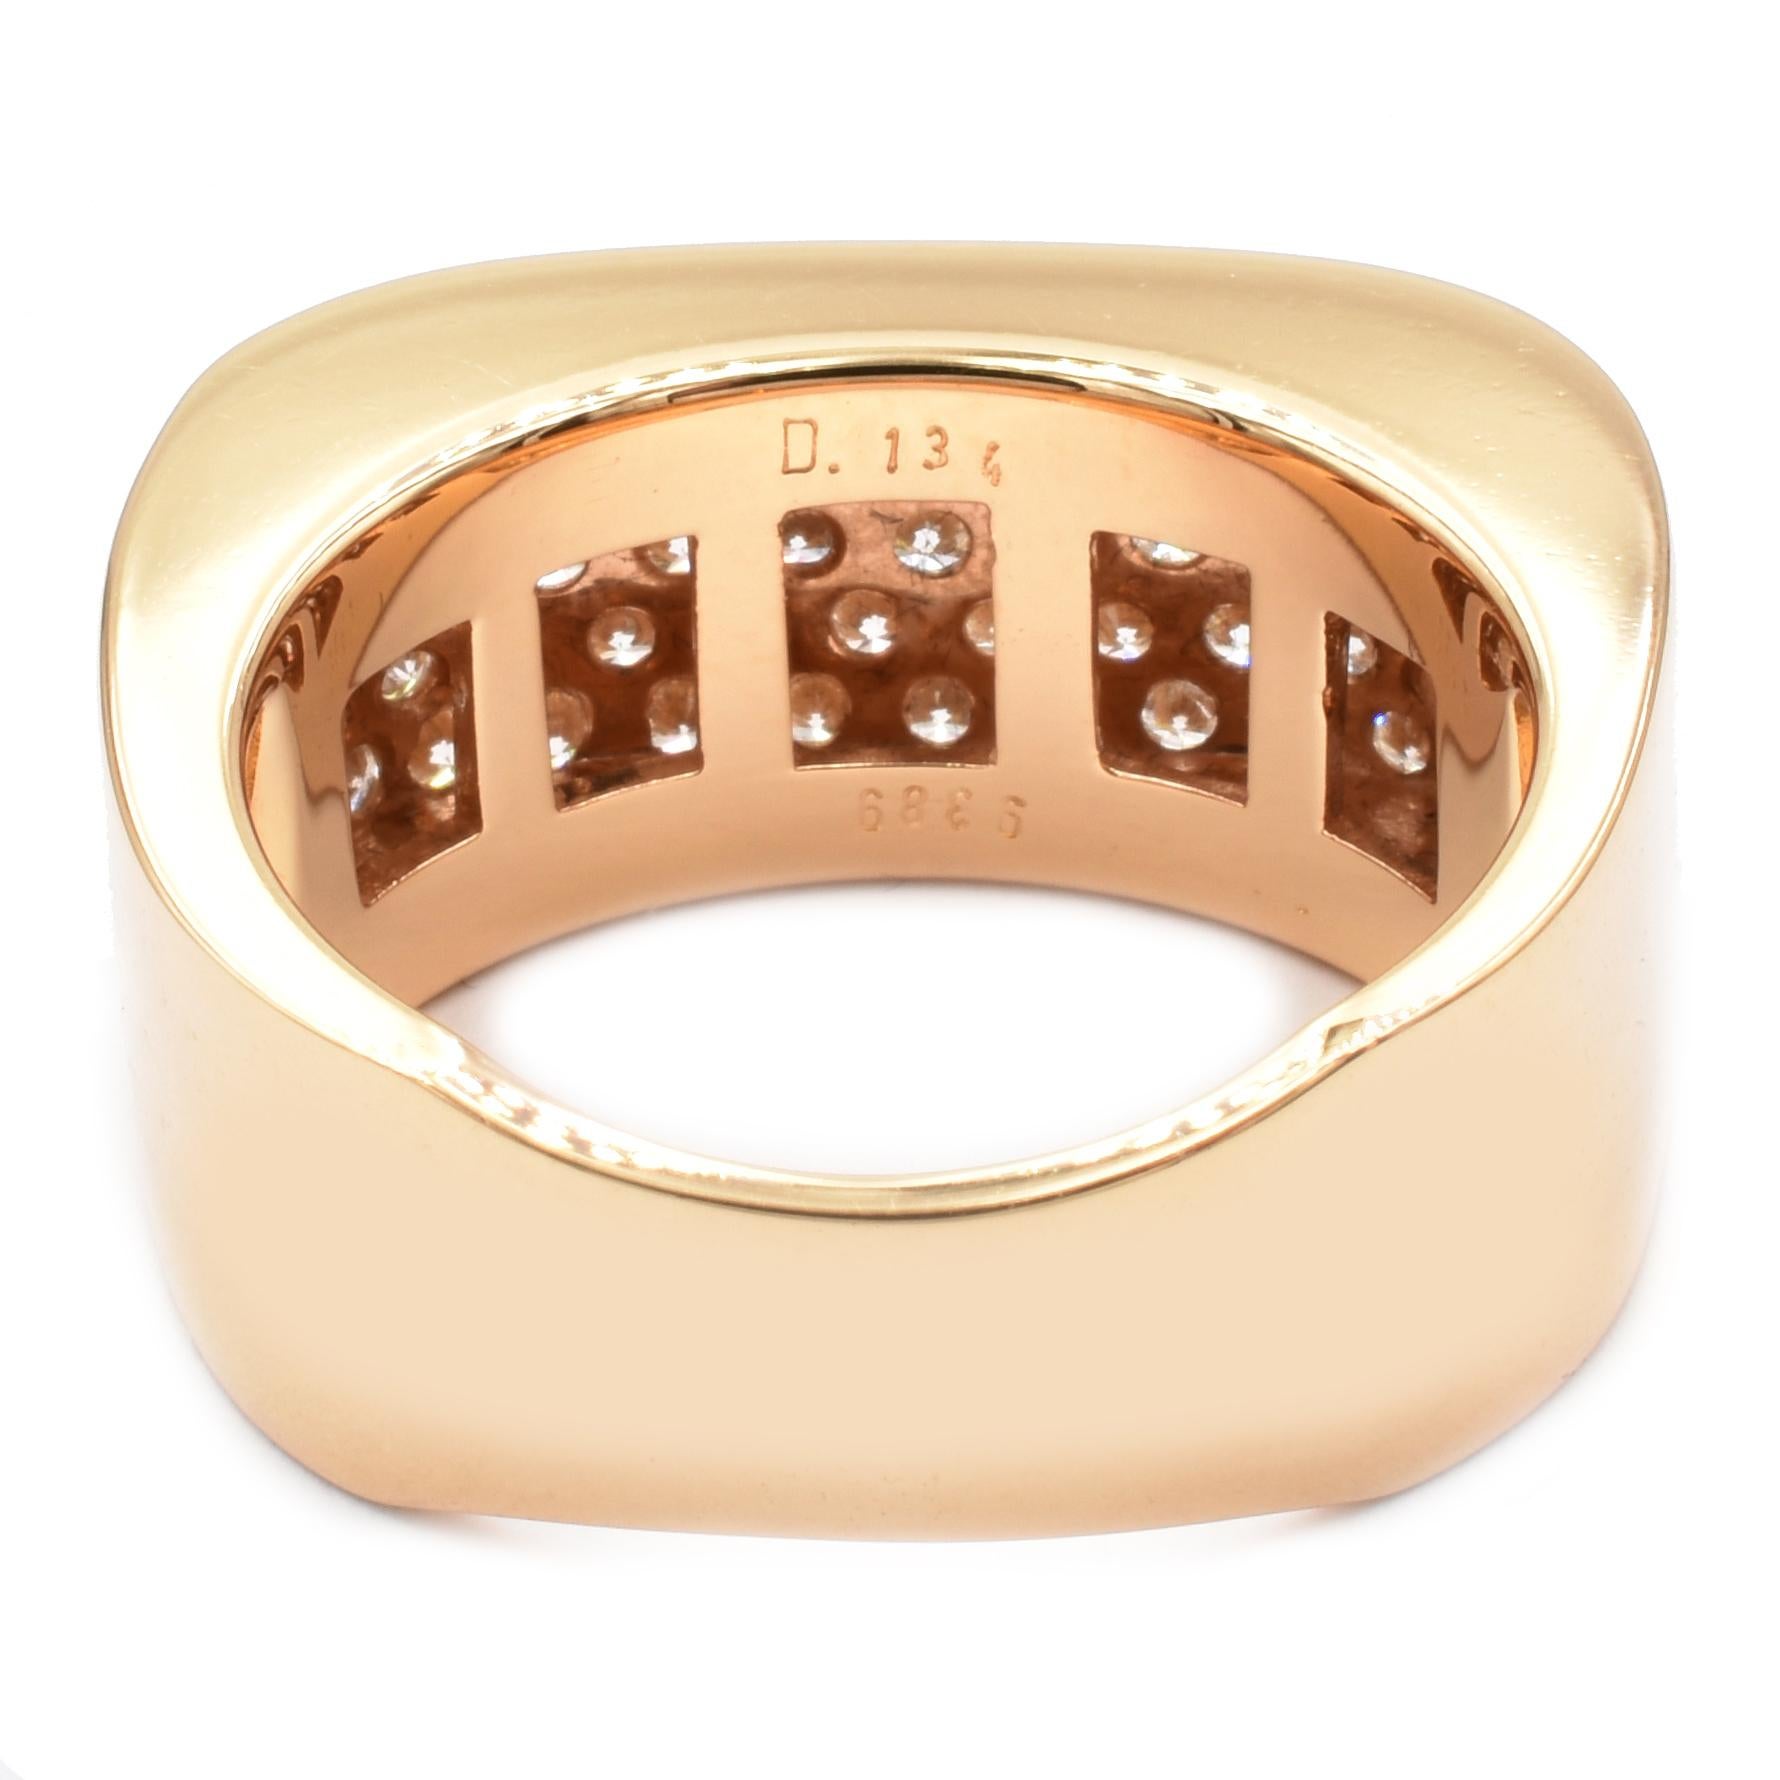 Gilberto Cassola Diamond Pave Rose Gold Square Ring Made in Italy In New Condition For Sale In Valenza, AL